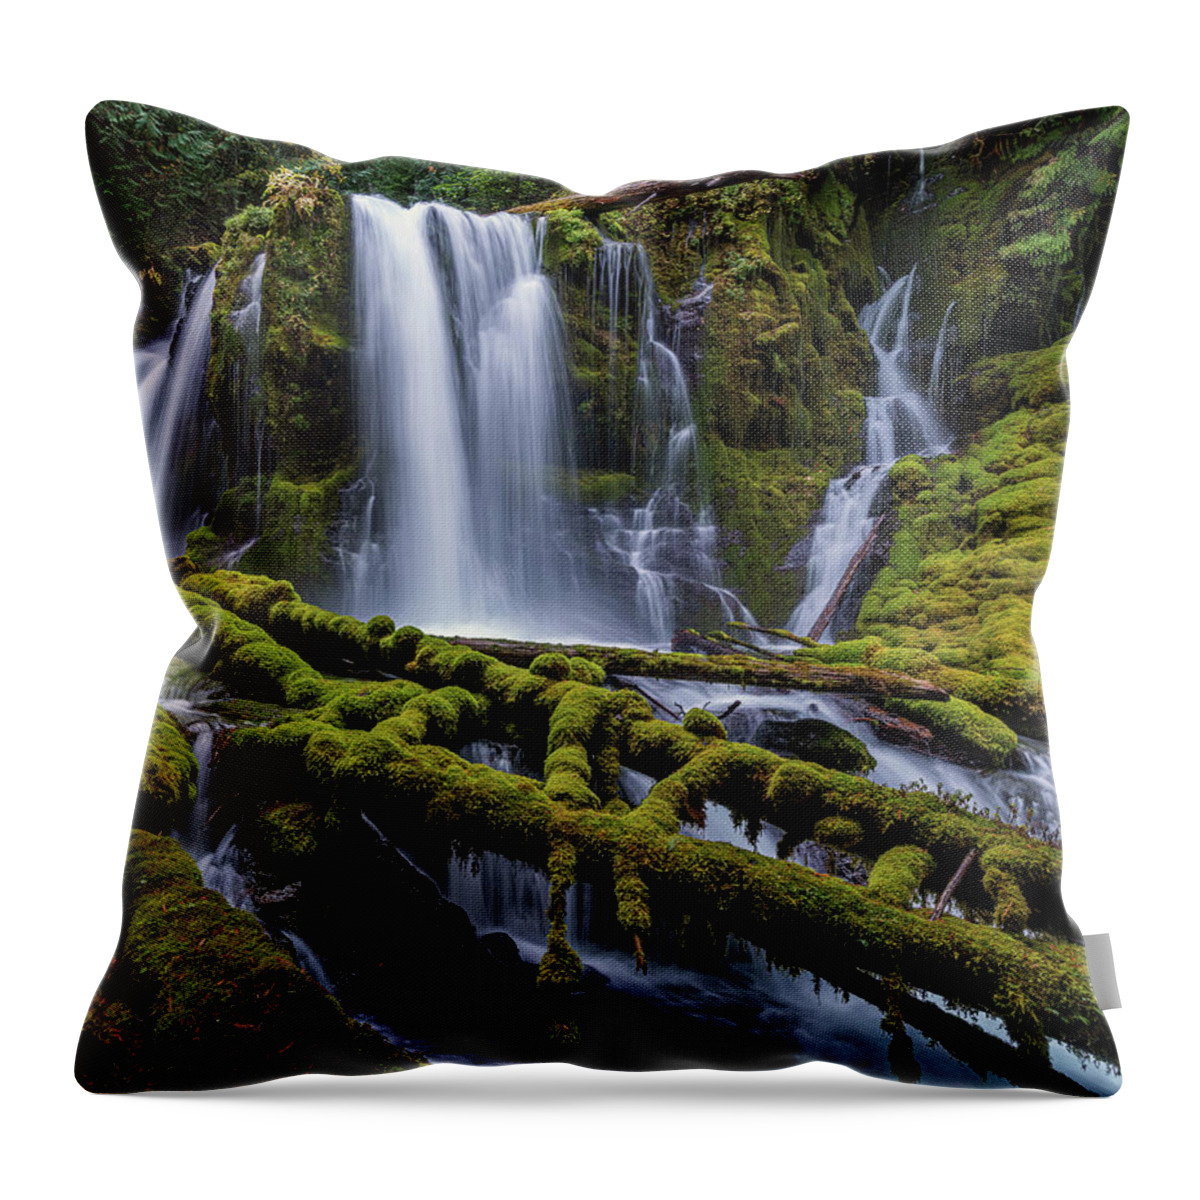 Downing Falls Throw Pillow featuring the photograph Downing Falls by Ulrich Burkhalter